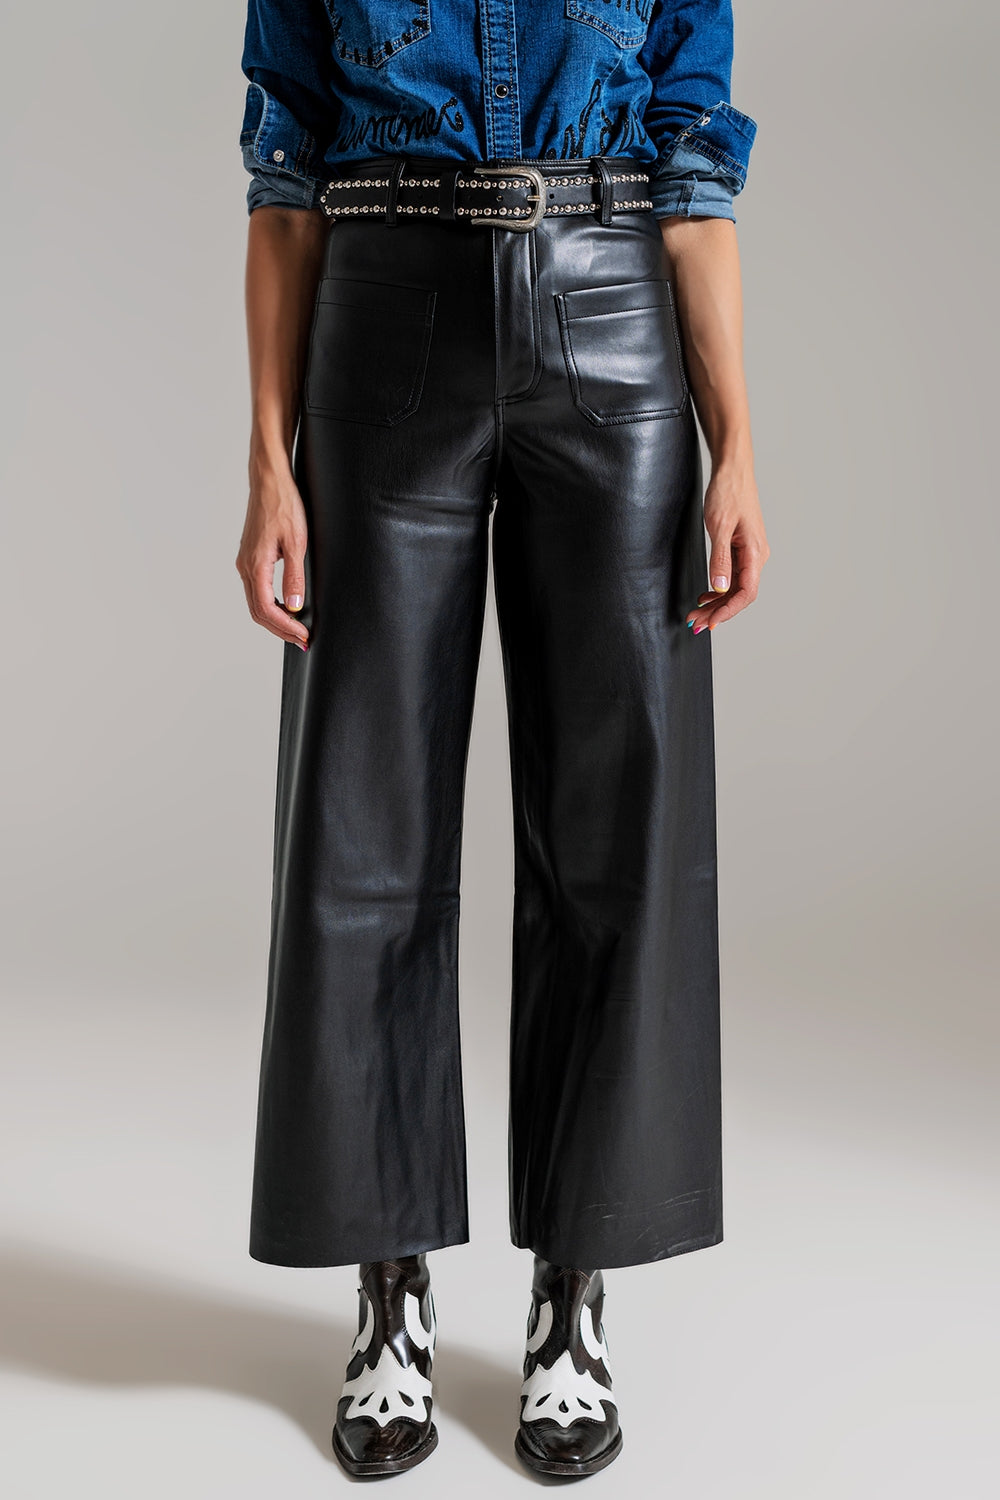 Q2 black palazzo-style faux leather pants with pocket detail